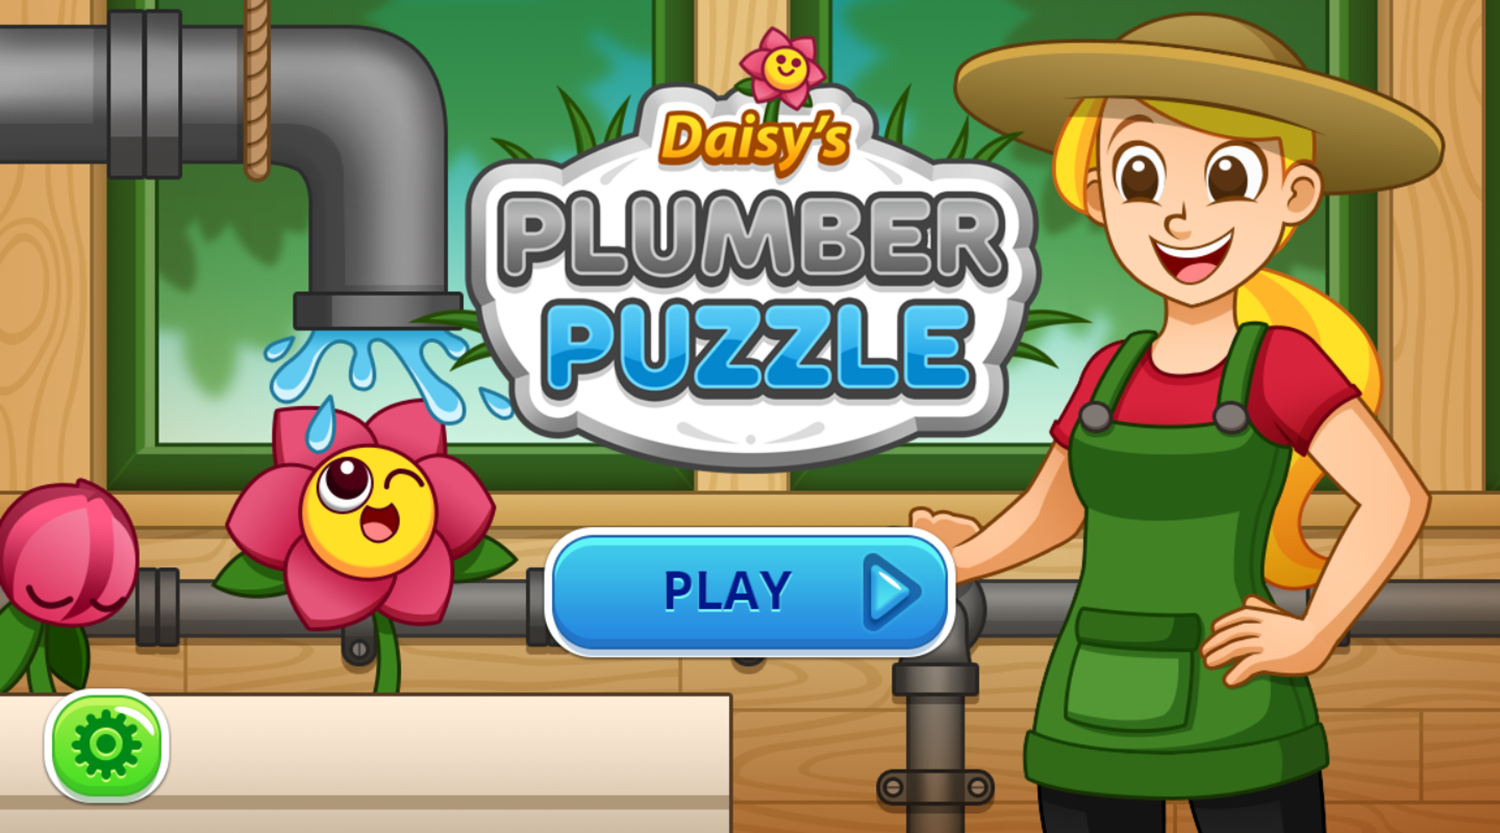 Daisy's Plumber Puzzle Game Welcome Screen Screenshot.